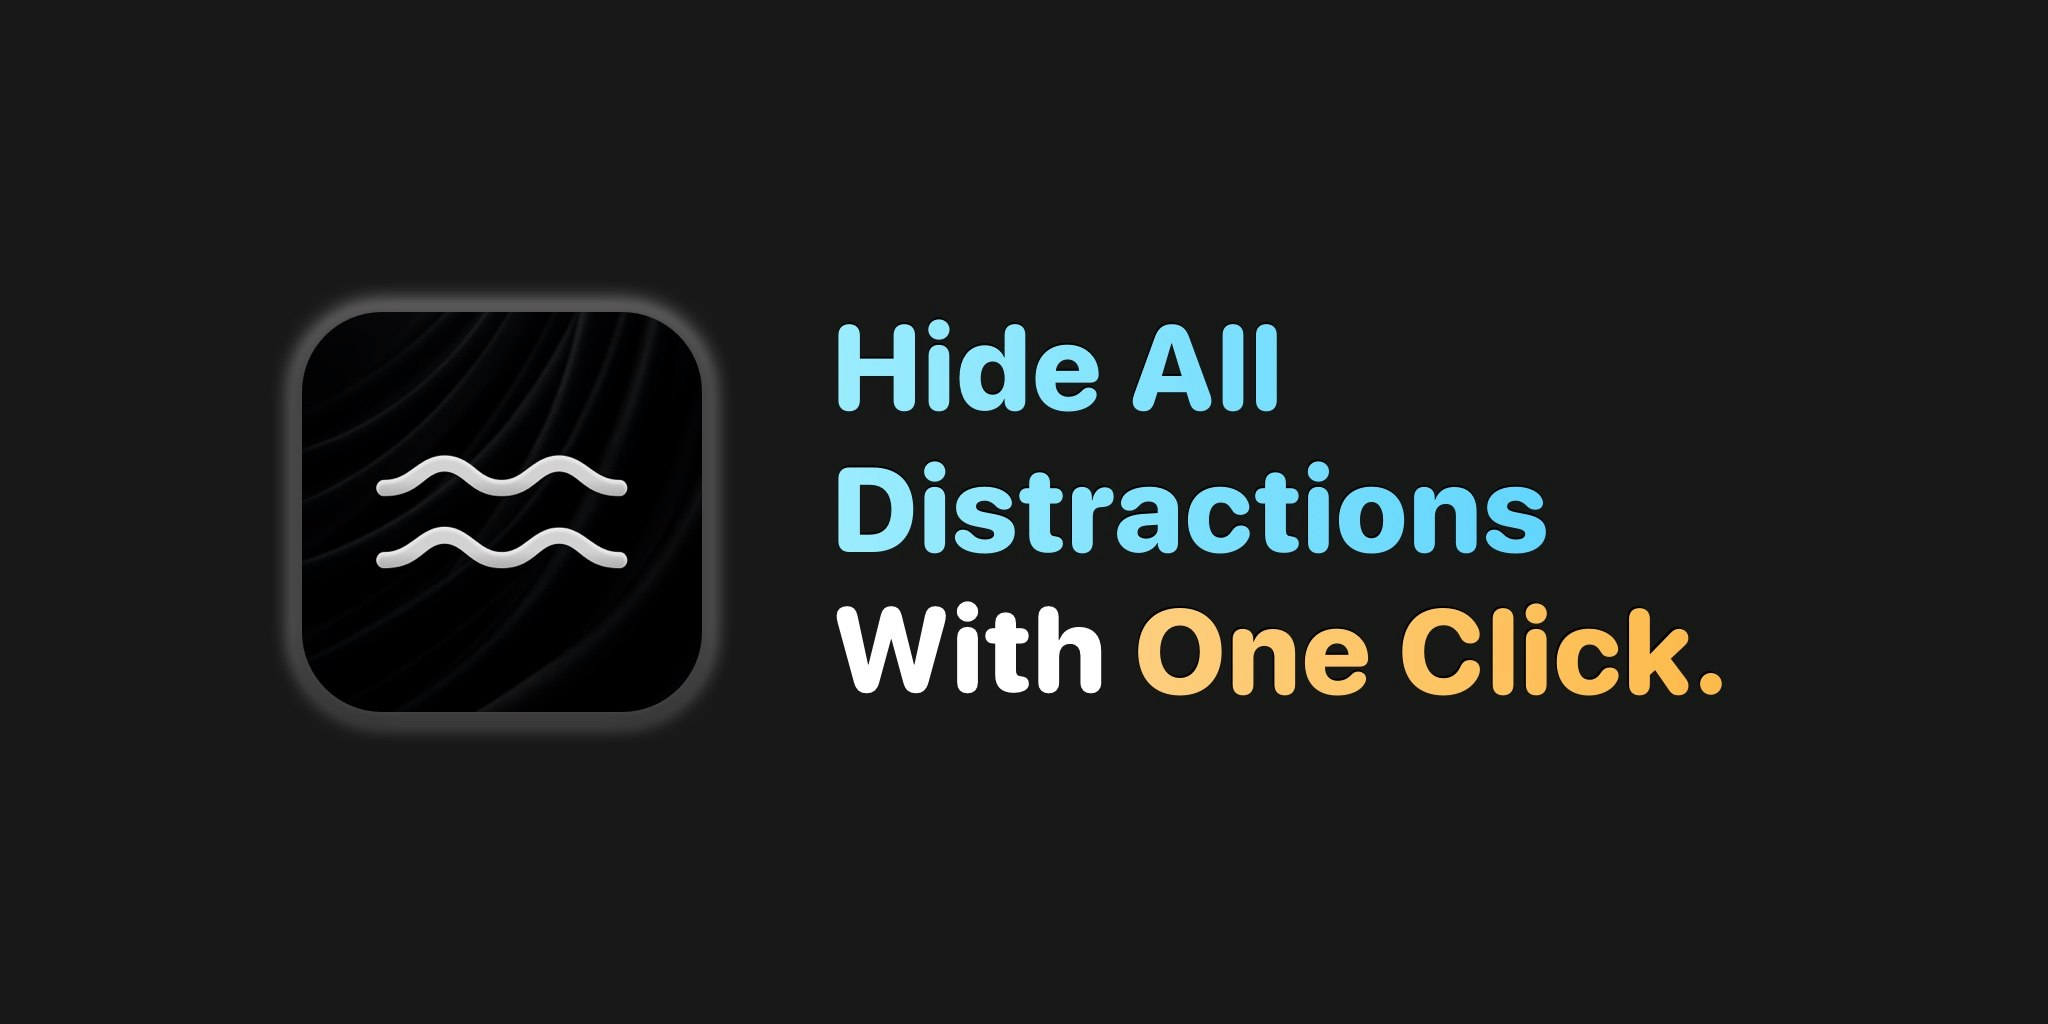 focusos - Hide all distractions with one click